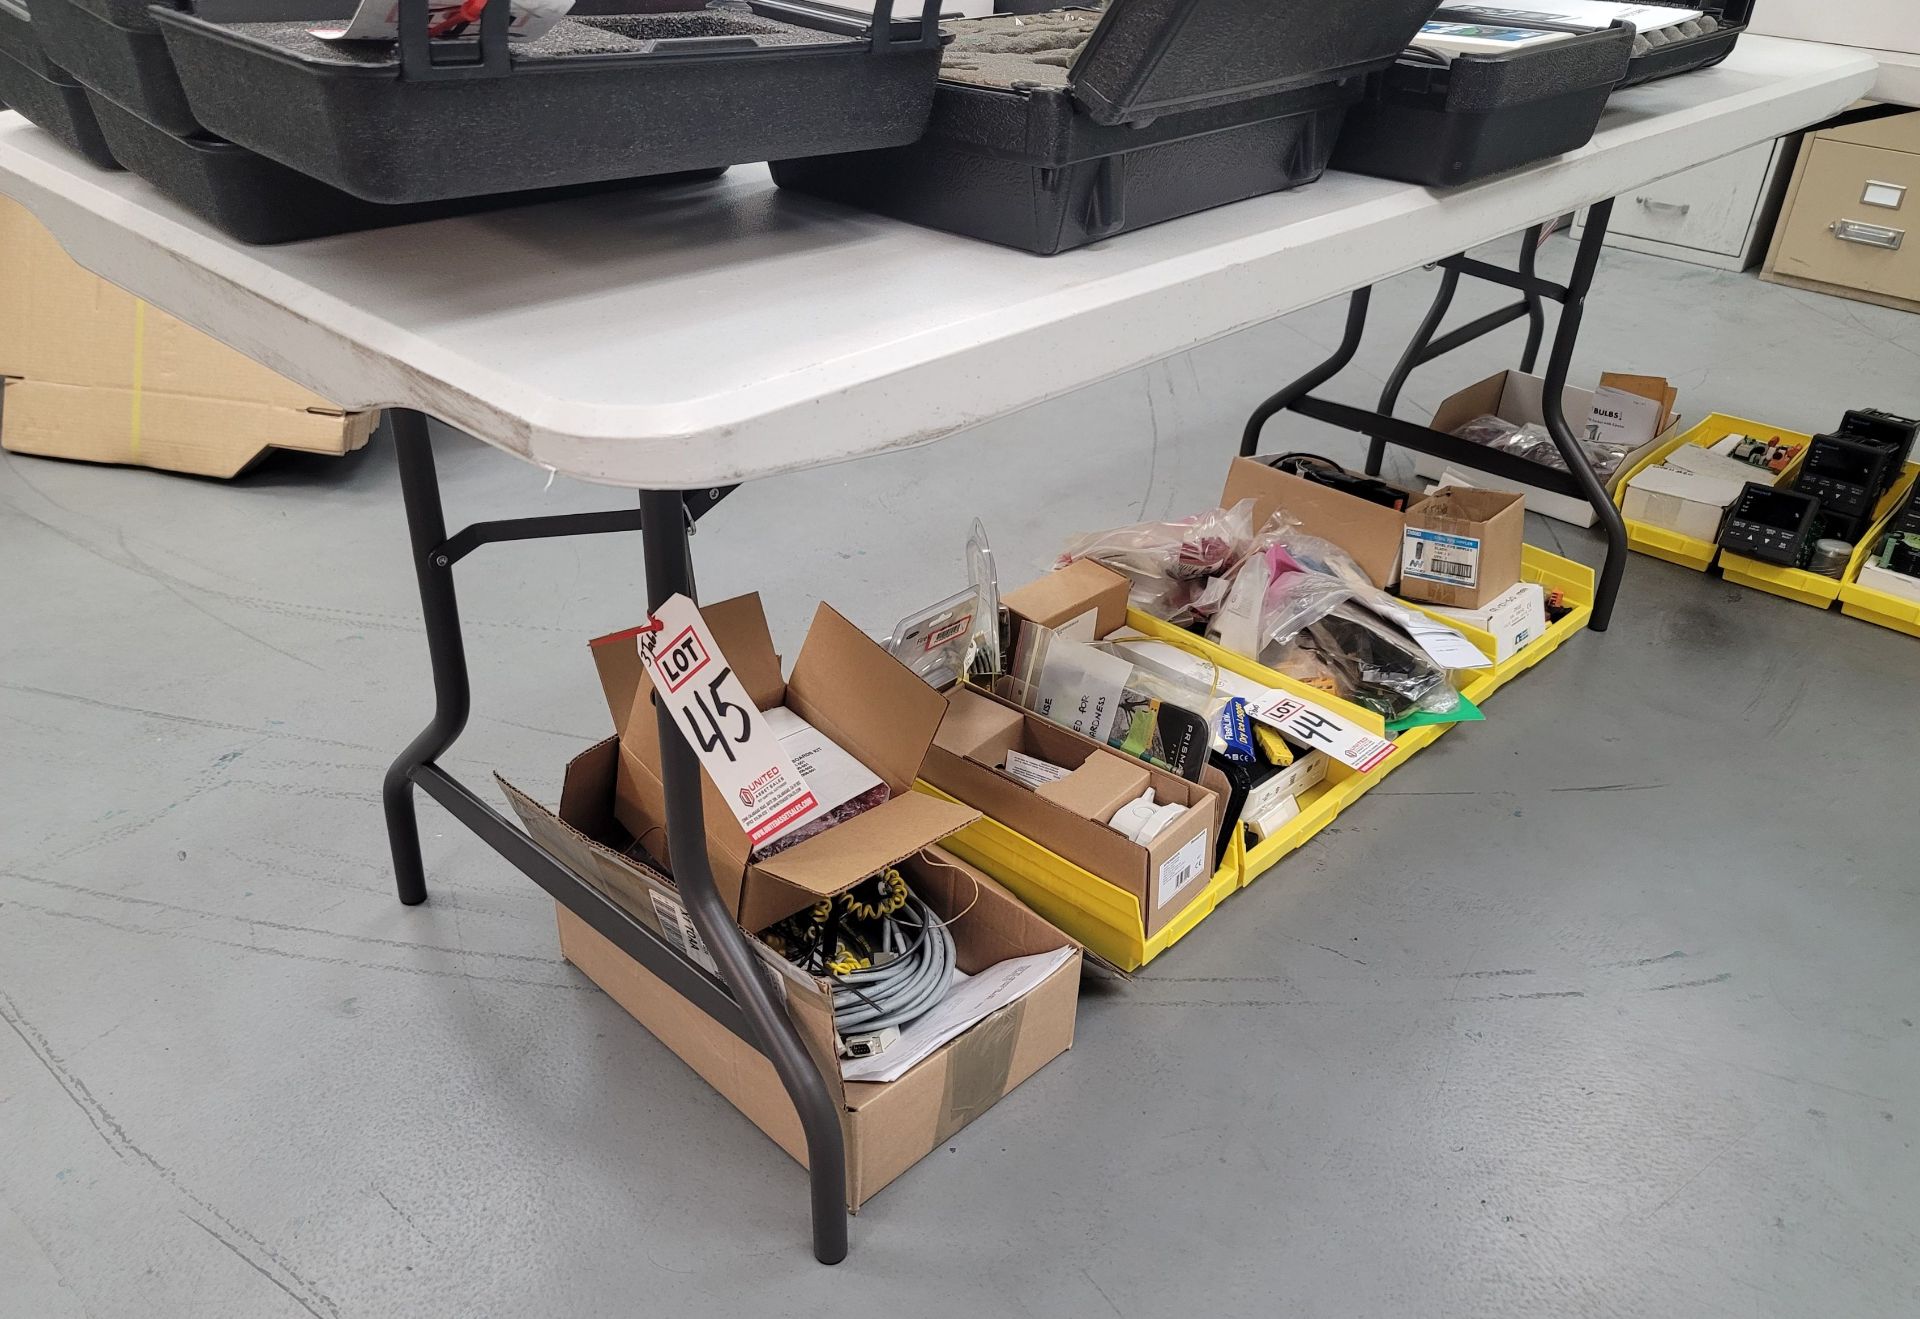 LOT - (3) FOLDING TABLES, 6' X 30", CONTENTS NOT INCLUDED, (DELAYED PICKUP UNTIL MARCH 1), (BUILDING